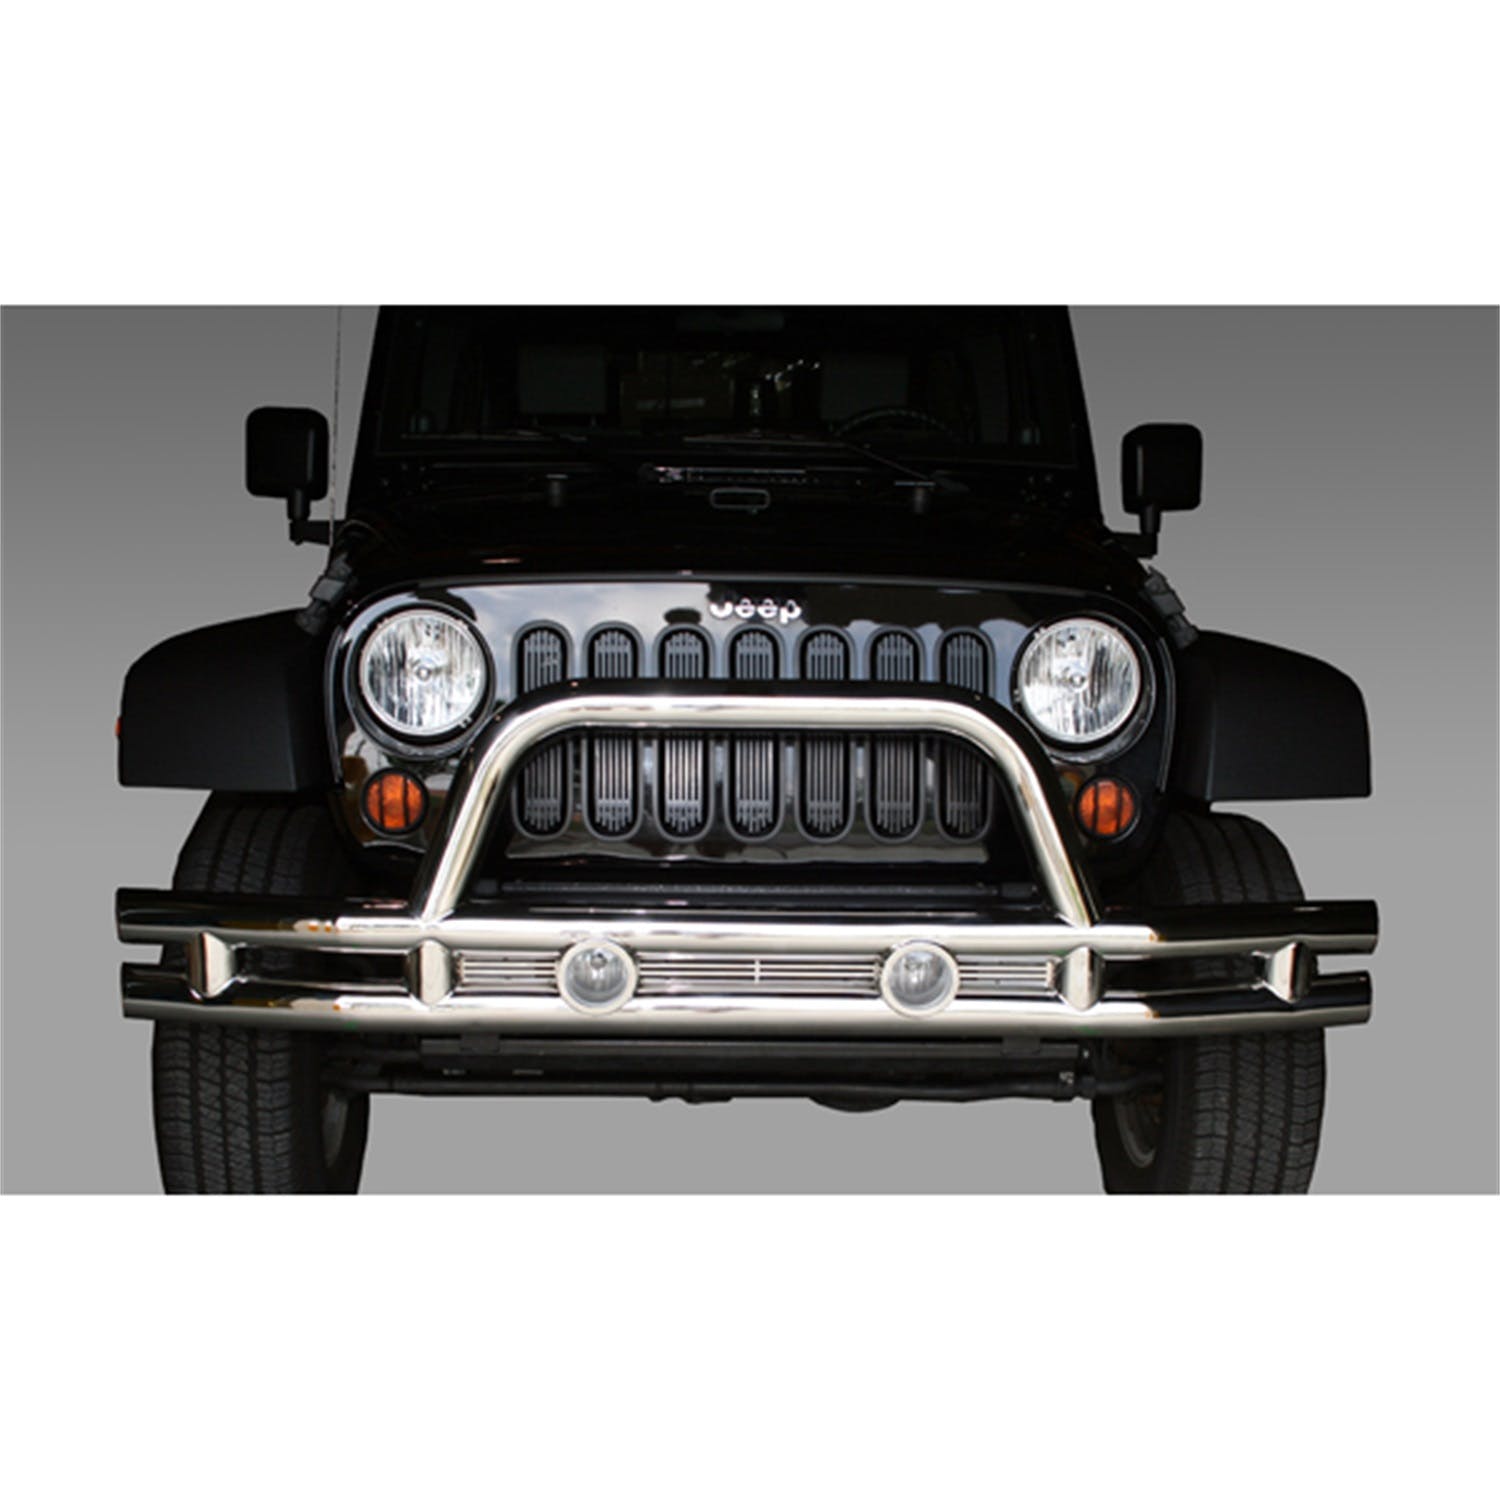 Rugged Ridge 11563.10 Tube Front Bumper, 3 Inch, Stainless Steel